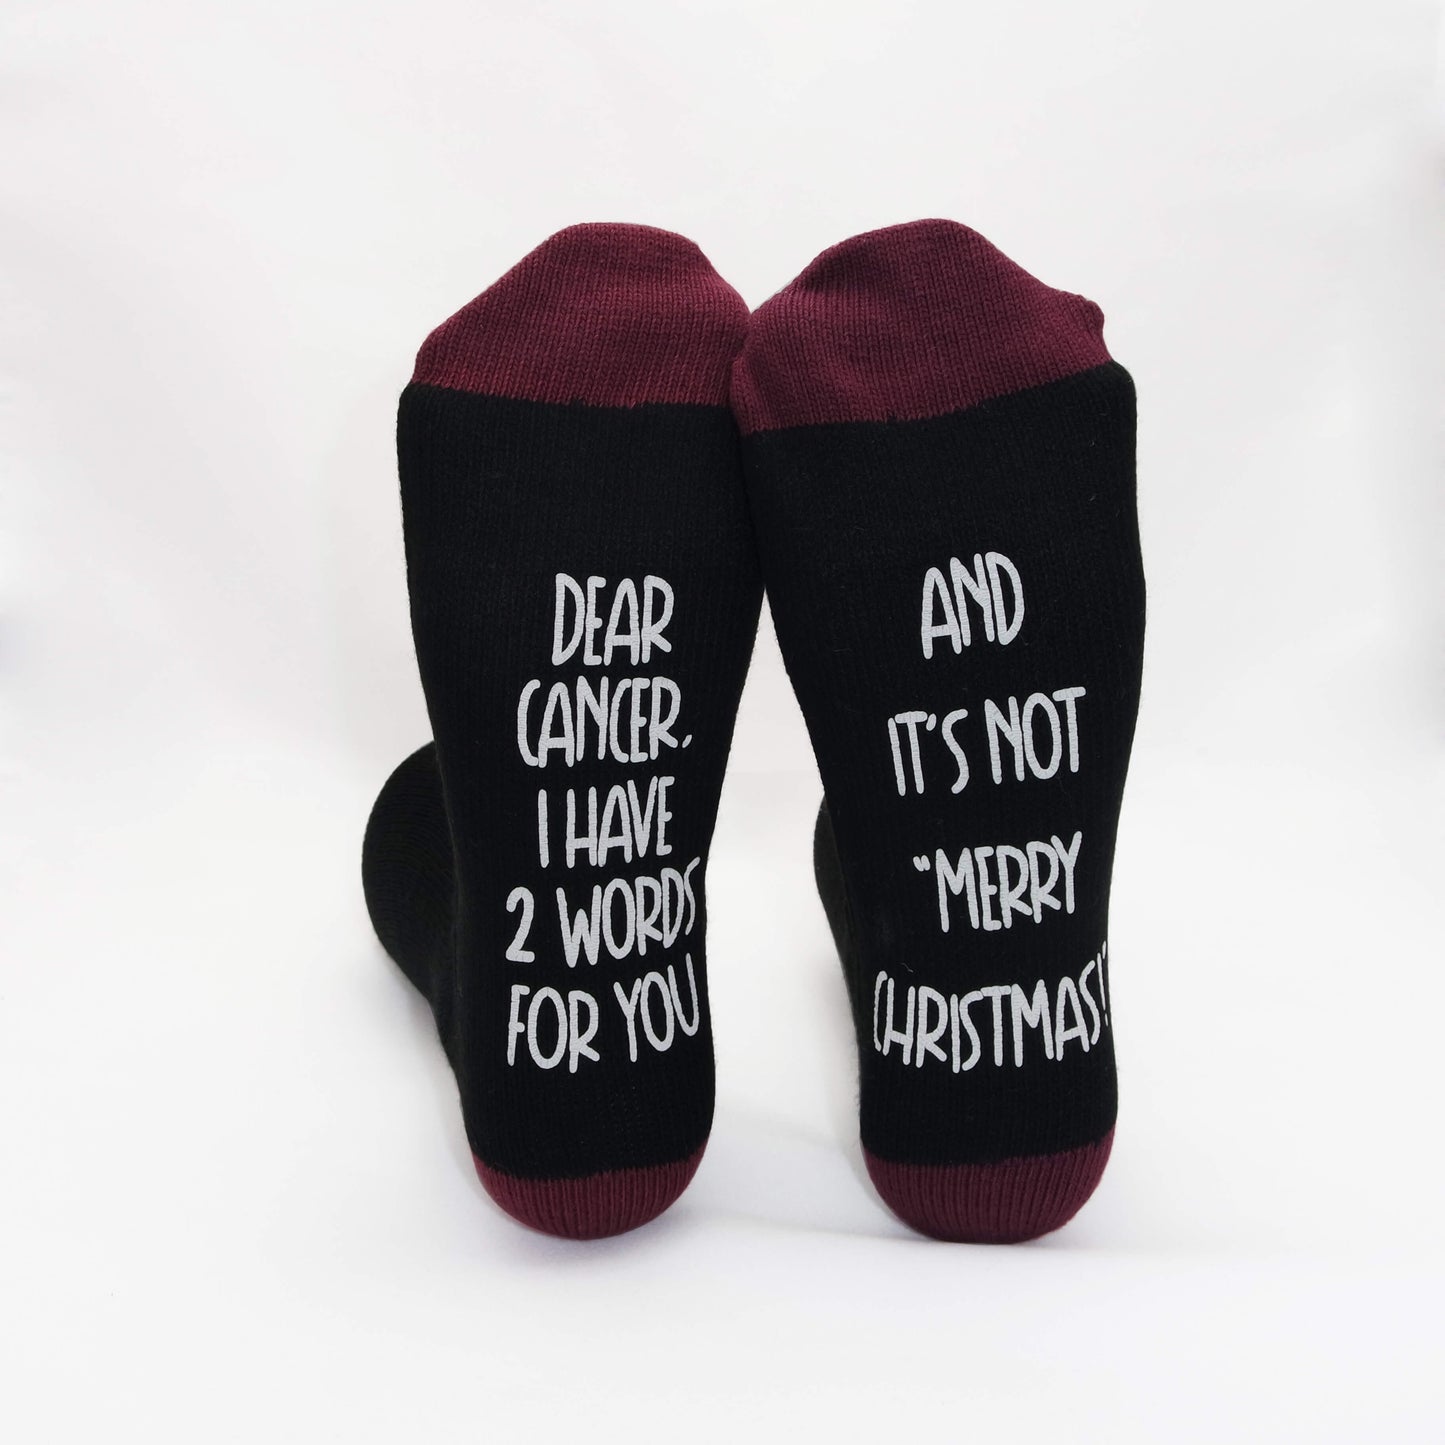 Men's Dear Cancer, I have 2 Words For You, And It's Not "Merry Christmas!" Cancer Socks